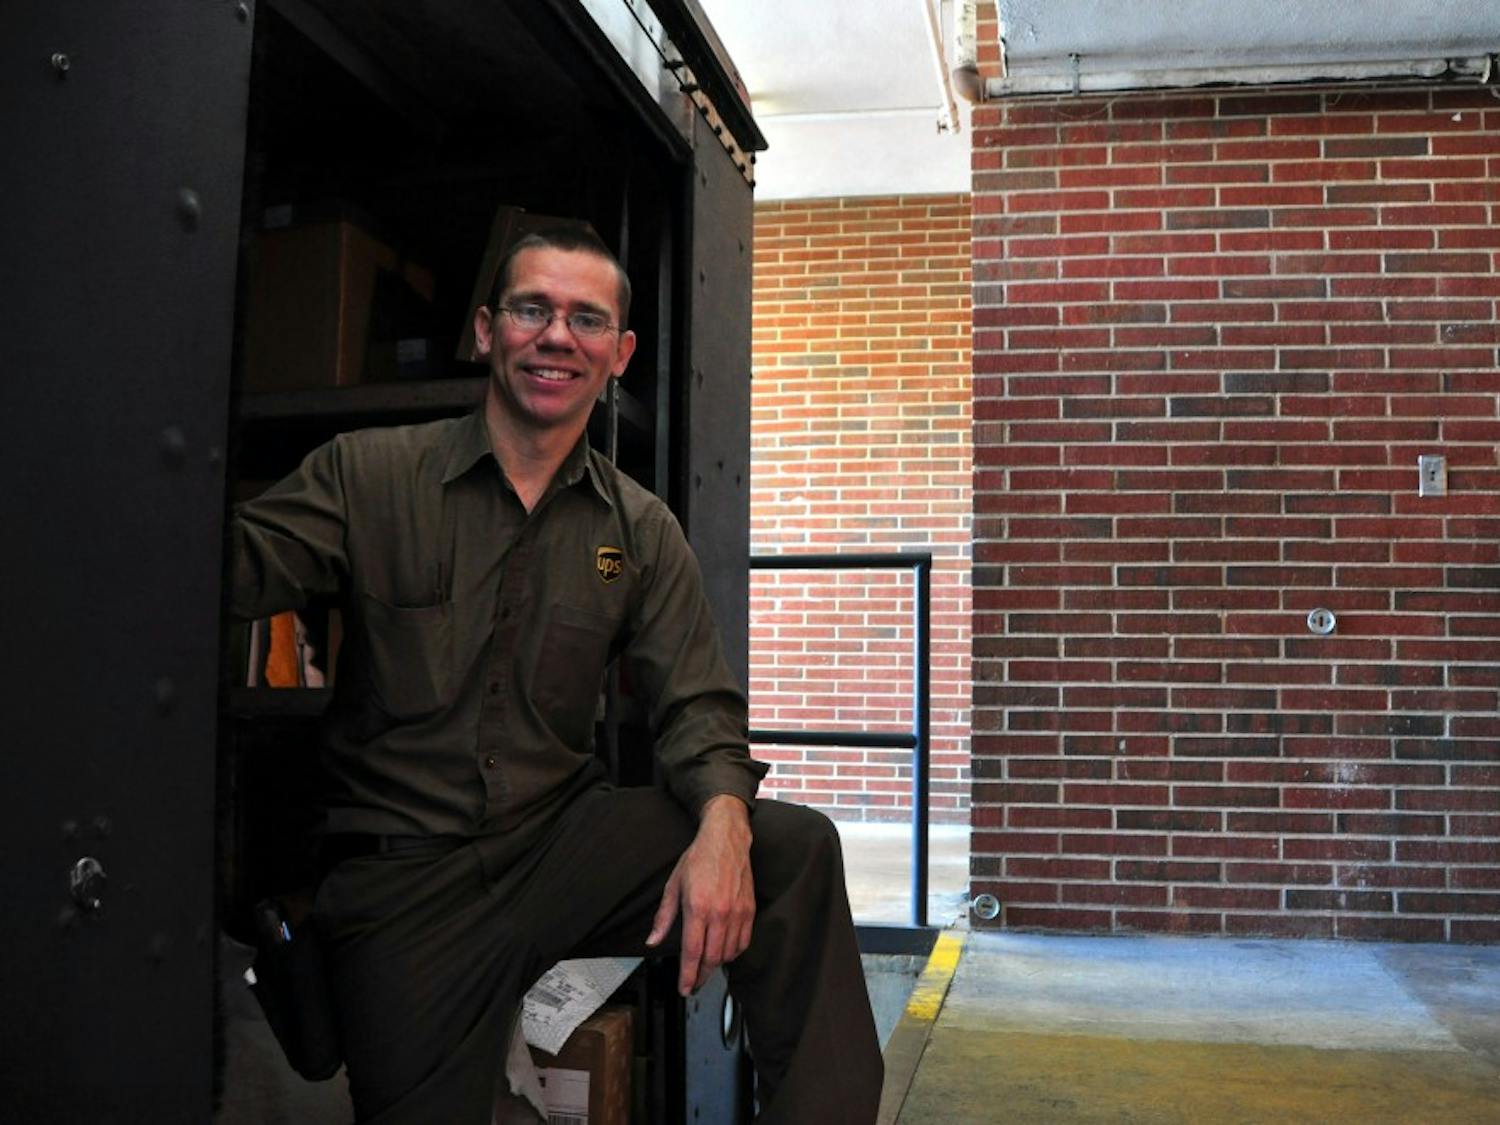 Richard Oden stands in a UPS truck at the Haley Center loading dock on Thursday, March 2, 2017, in Auburn, Ala.